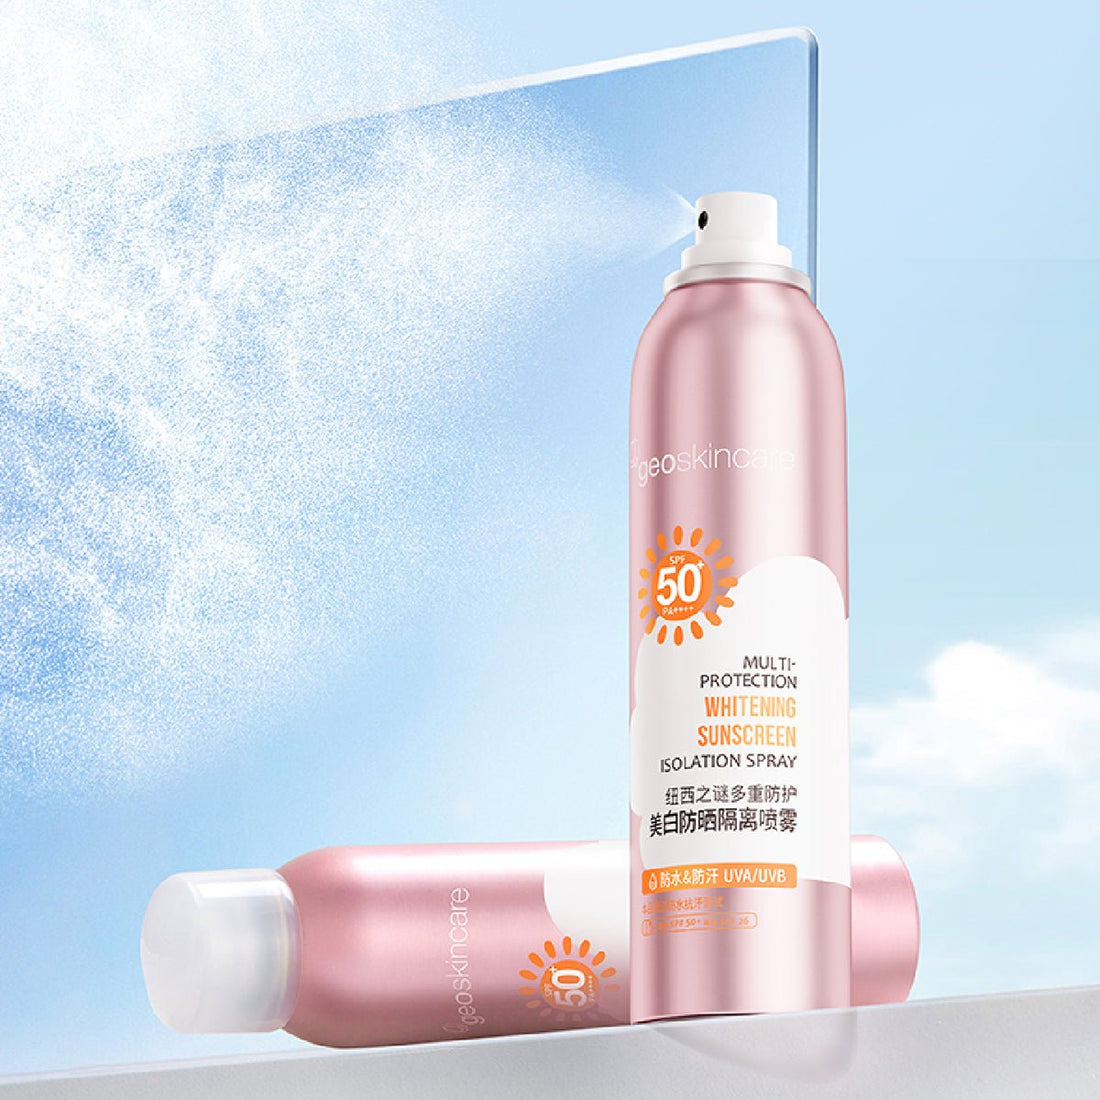 Multi-protection Whitening Sunscreen Isilation Spray 120ml (SPF50+ PA++++) - 0cm